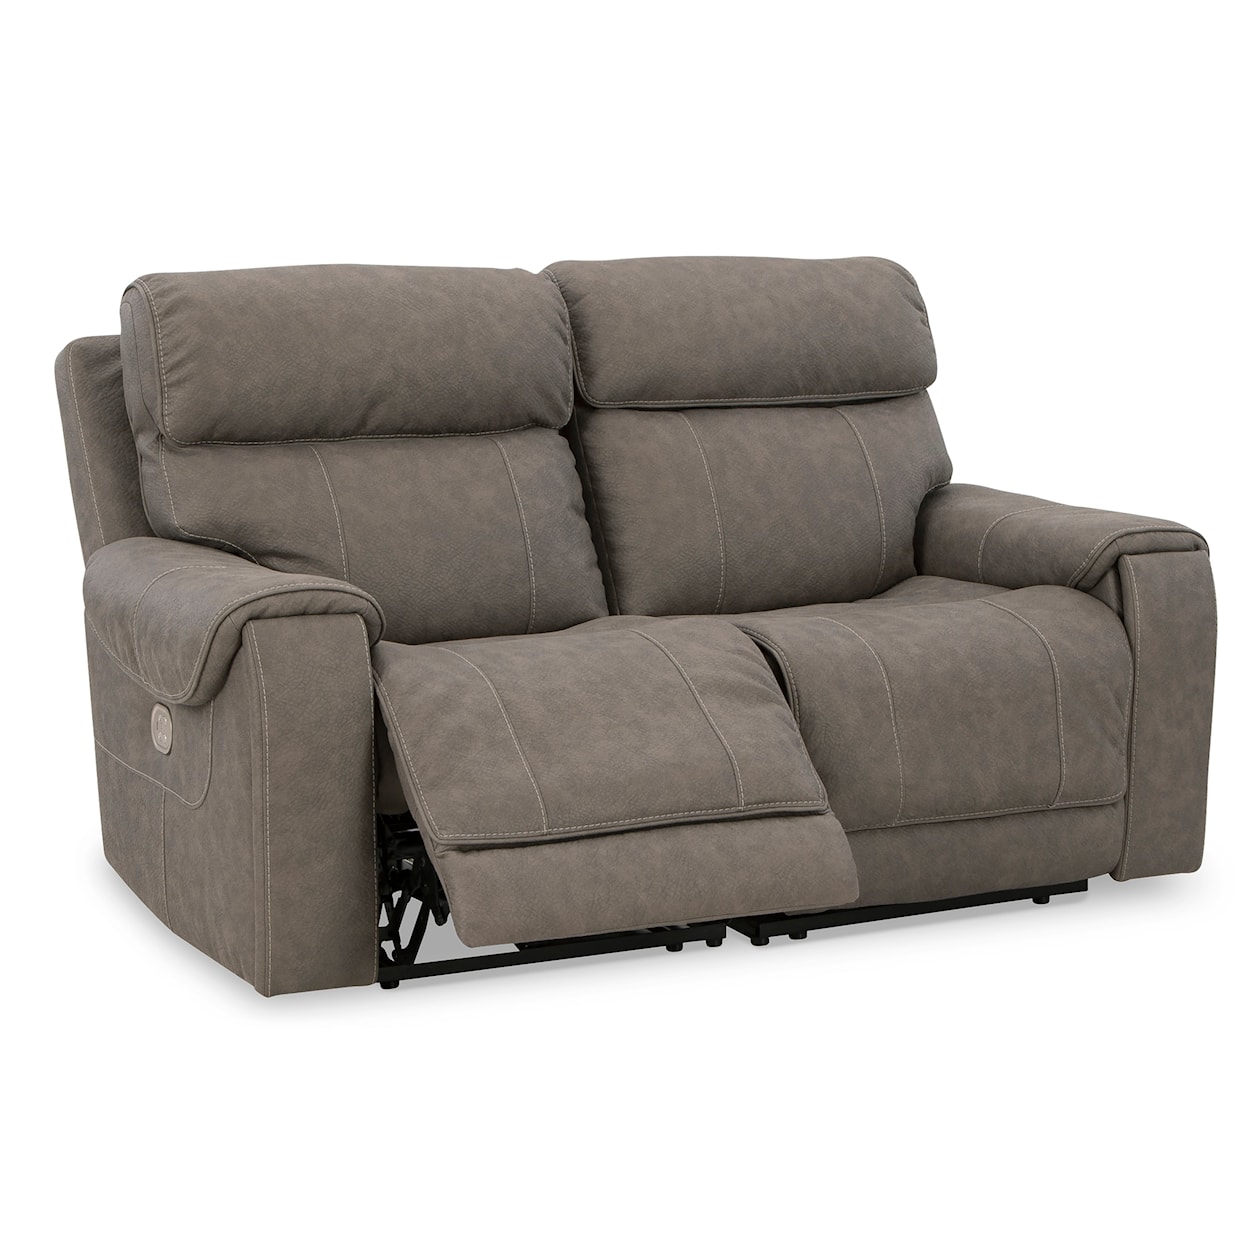 Signature Design by Ashley Starbot 2-Piece Power Reclining Loveseat